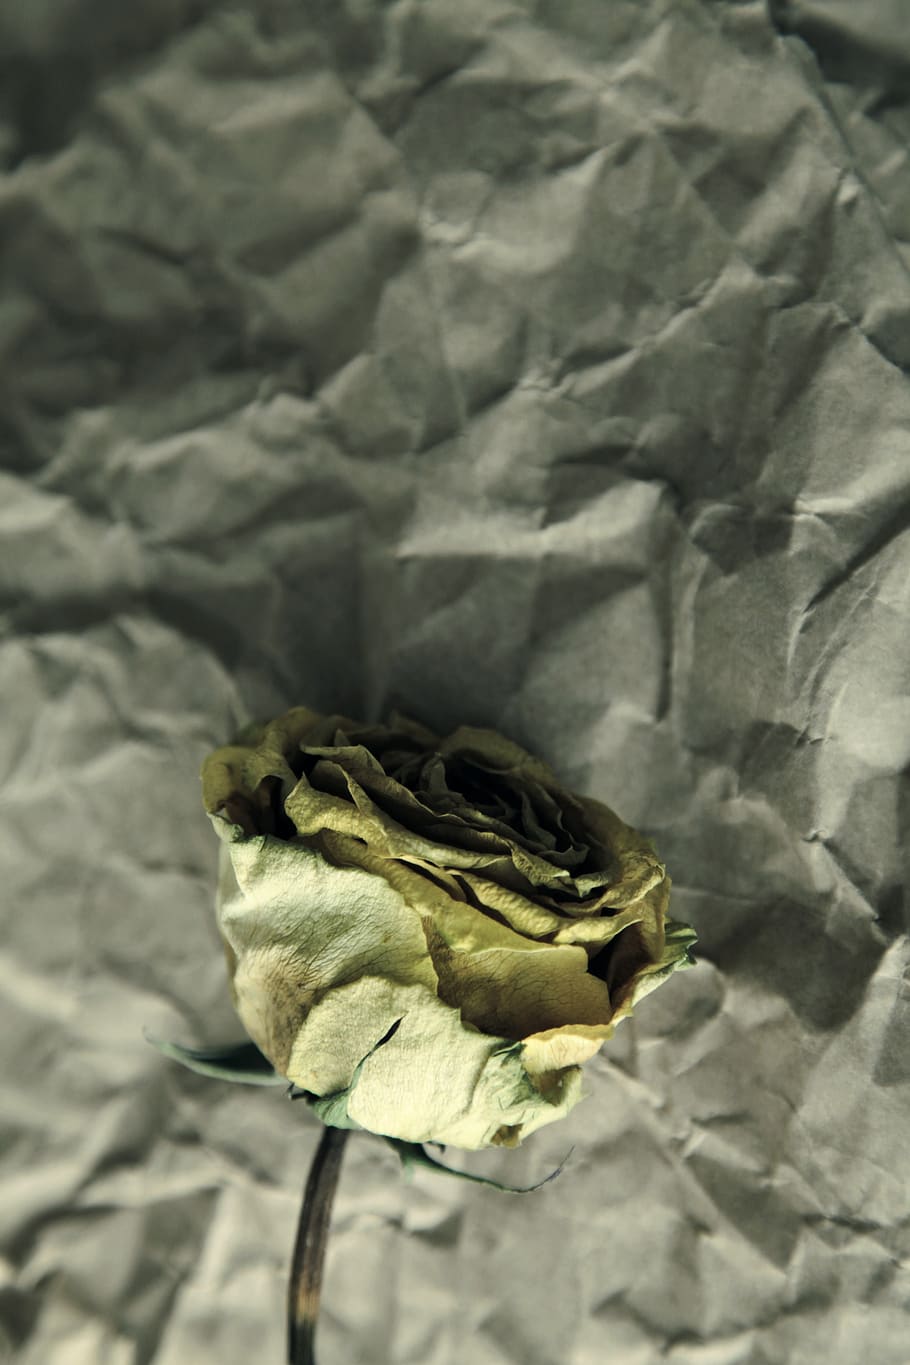 wilted, yellow, faded, wilt, dead, dry, dried, wilting, fading, fade